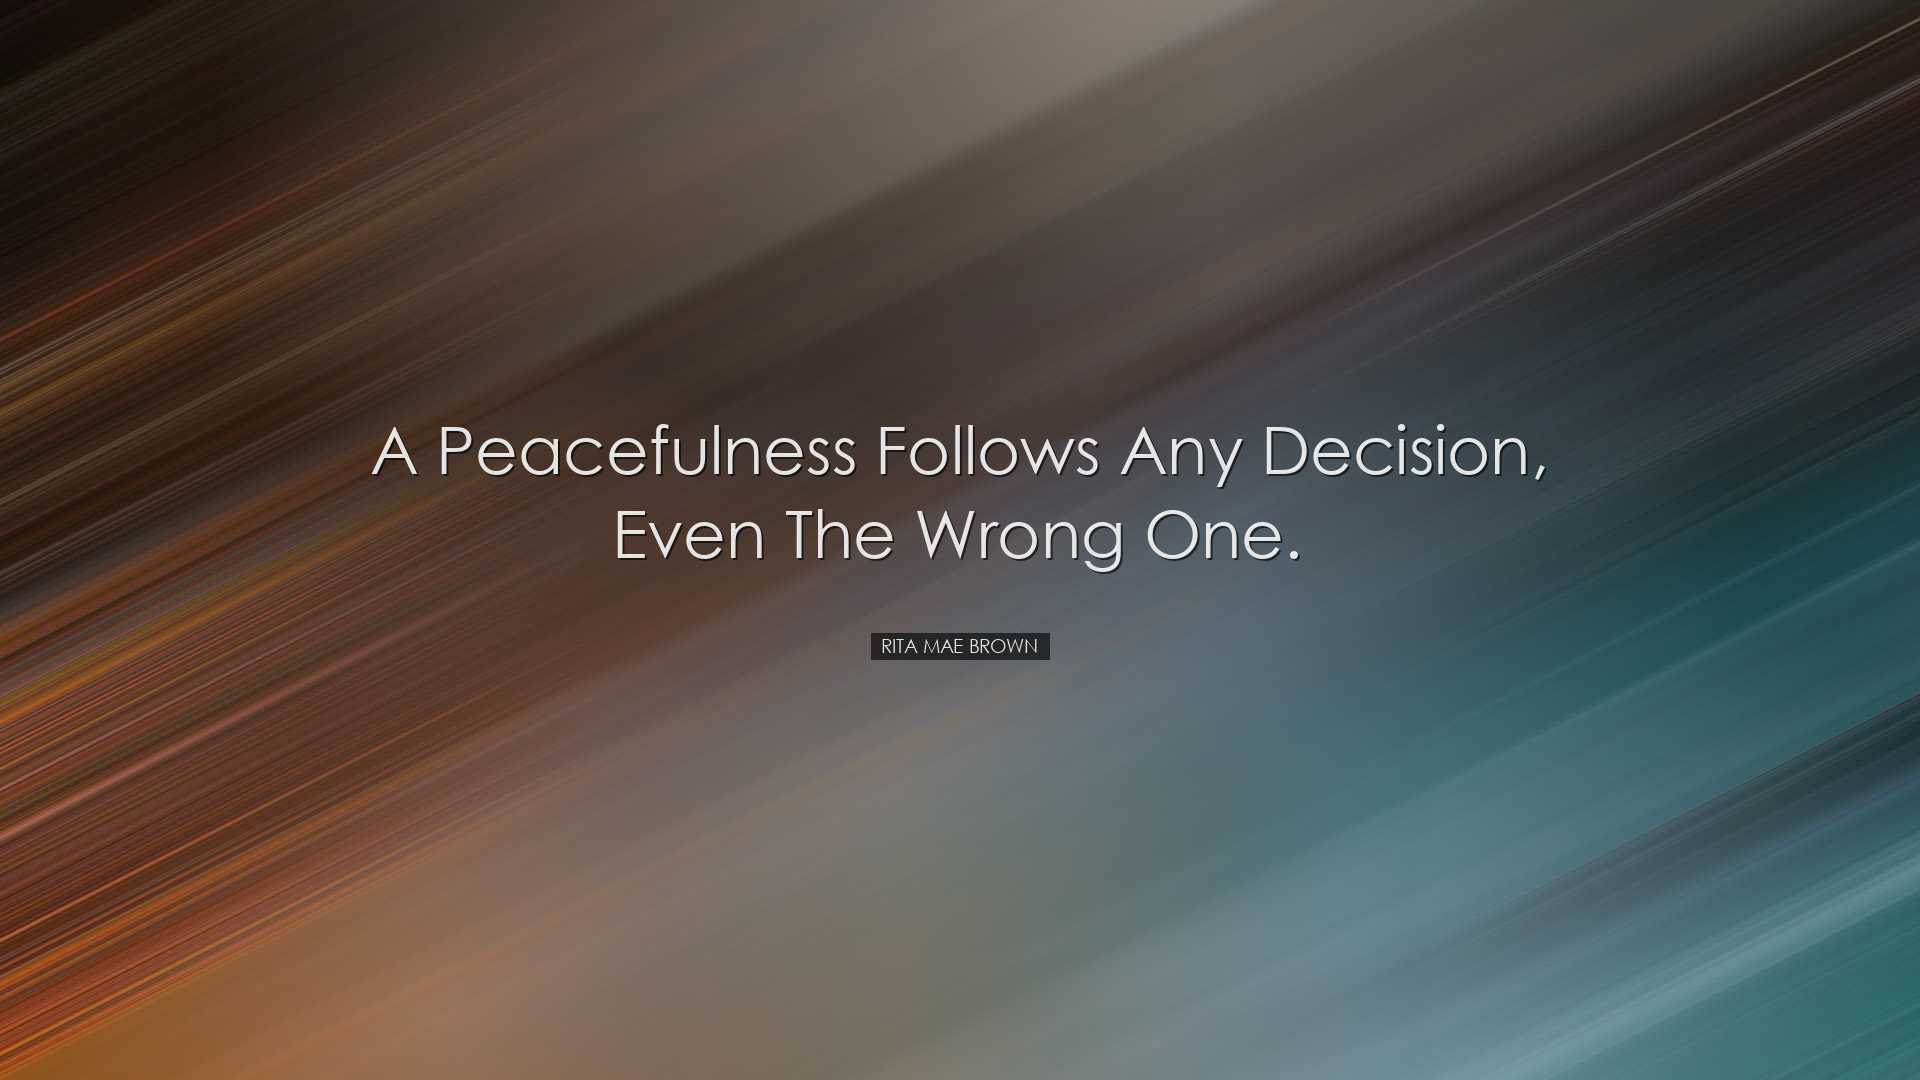 A peacefulness follows any decision, even the wrong one. - Rita Ma